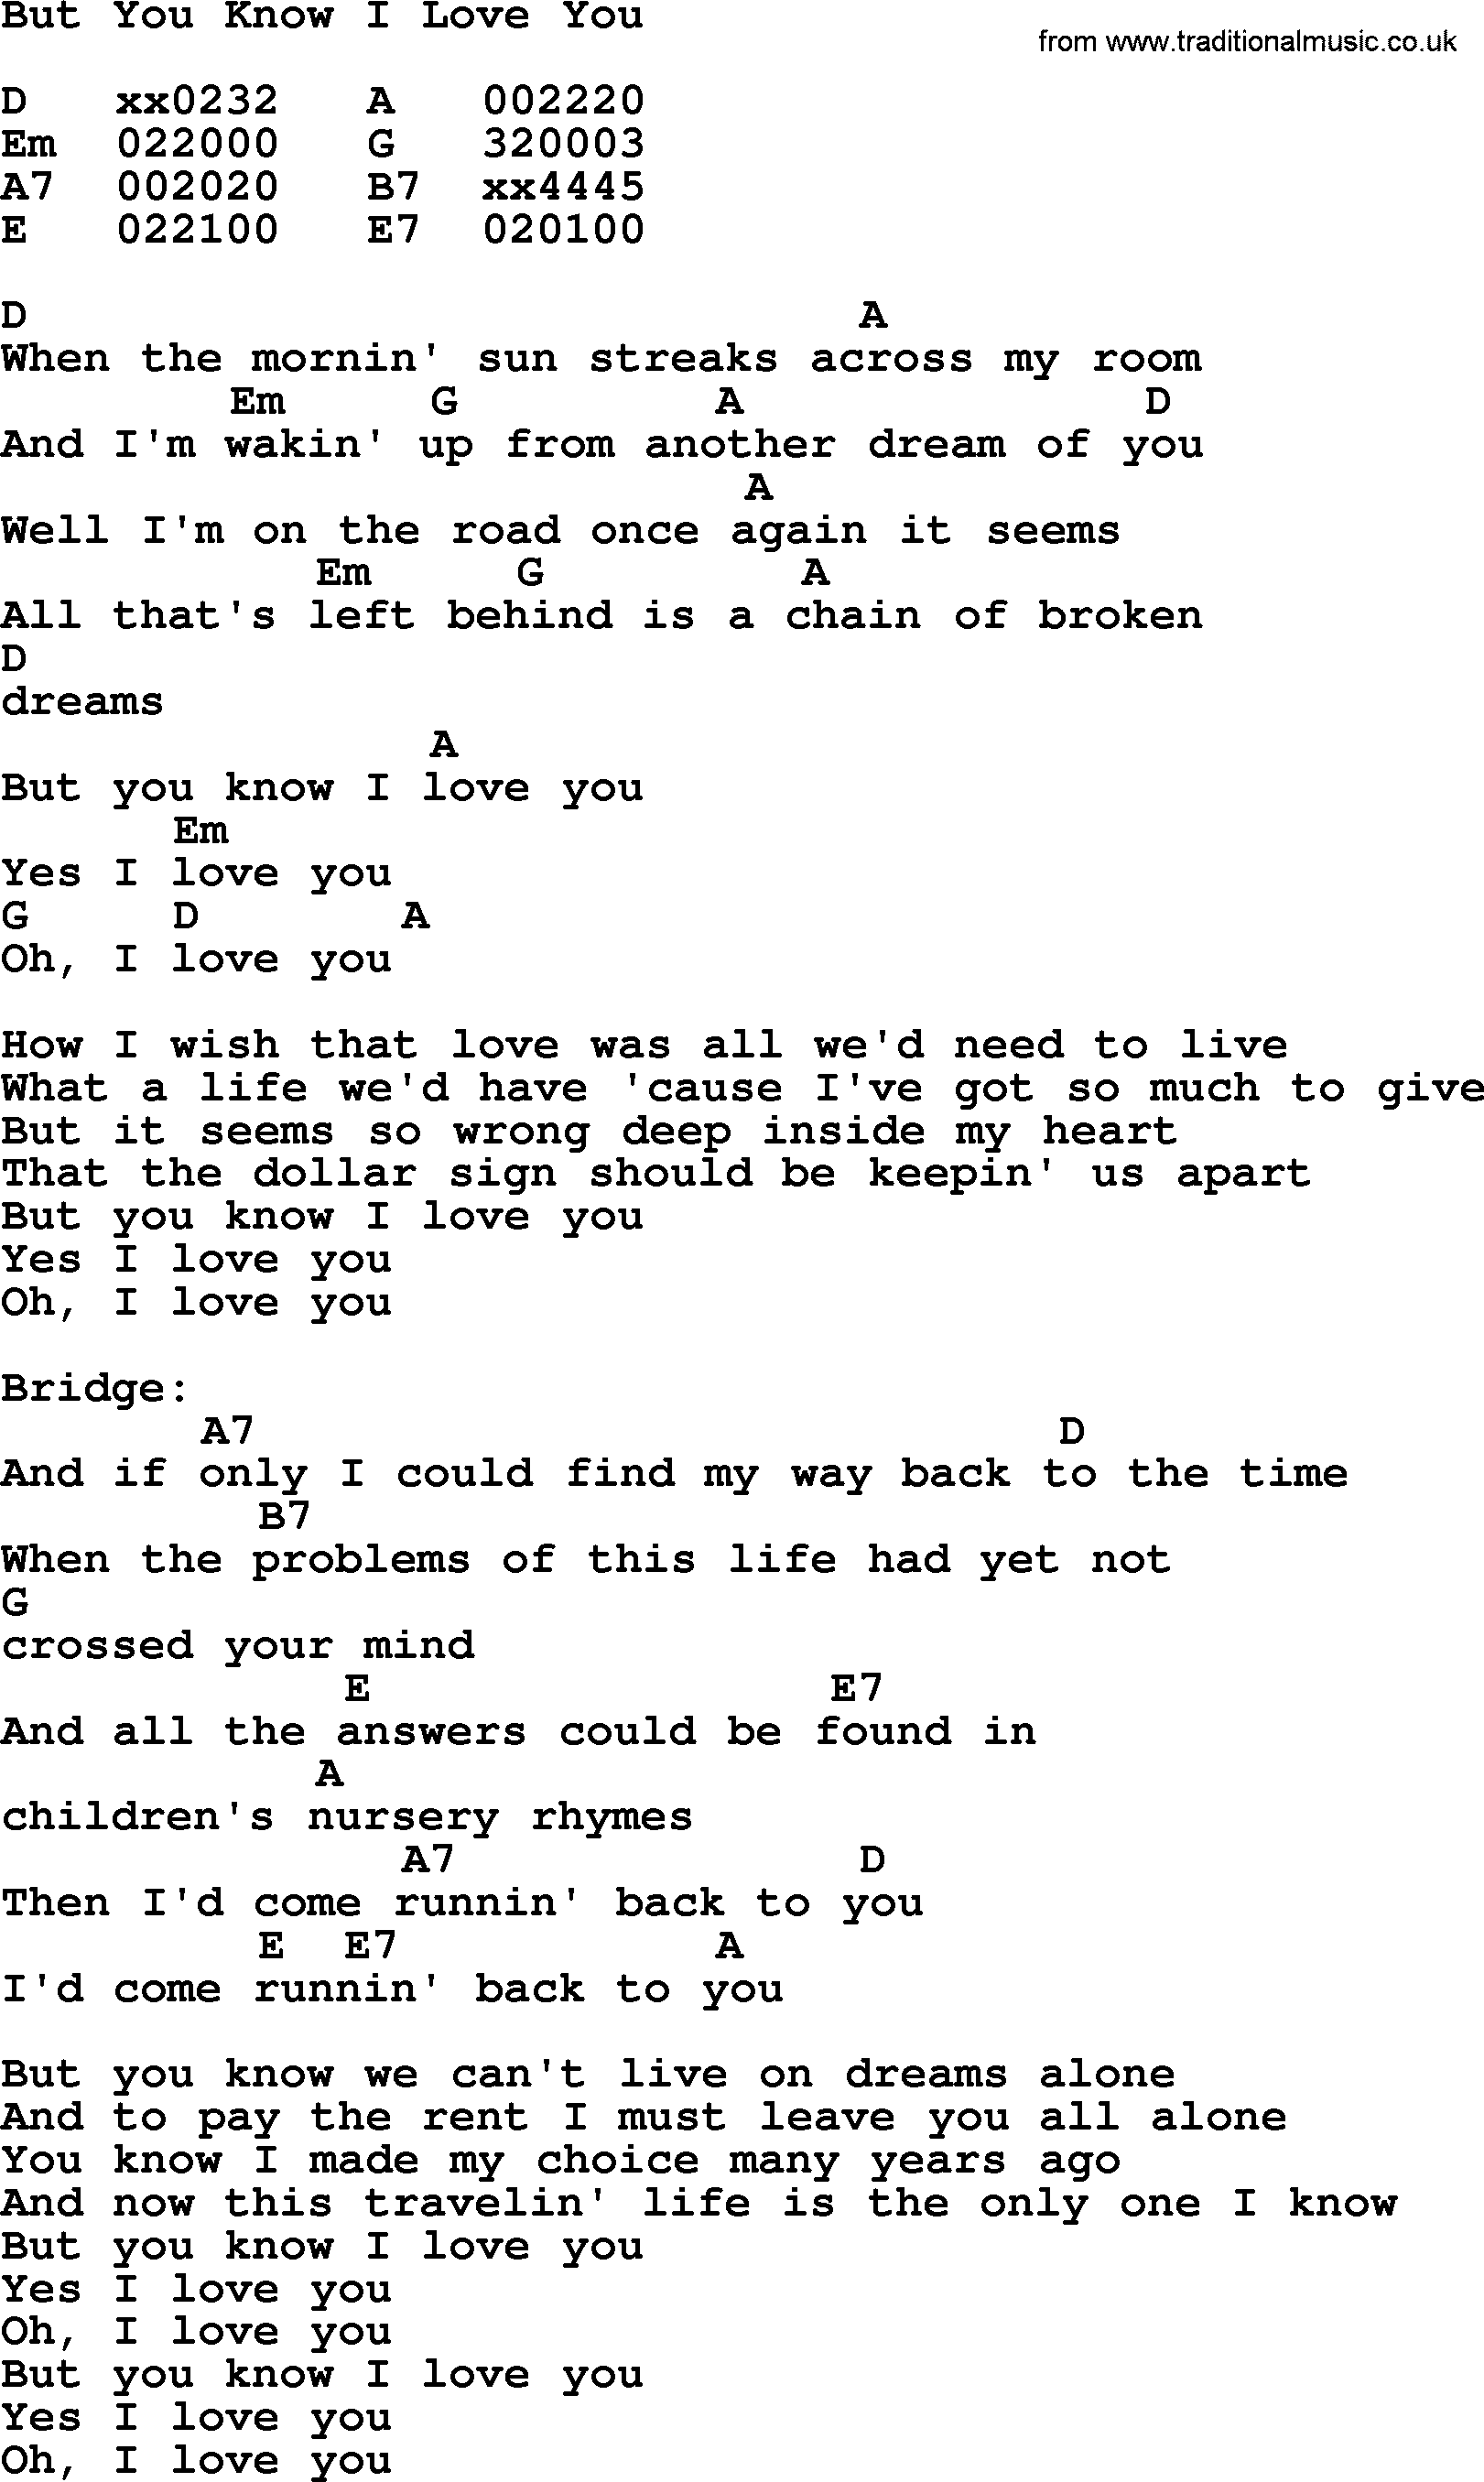 Bluegrass song: But You Know I Love You, lyrics and chords